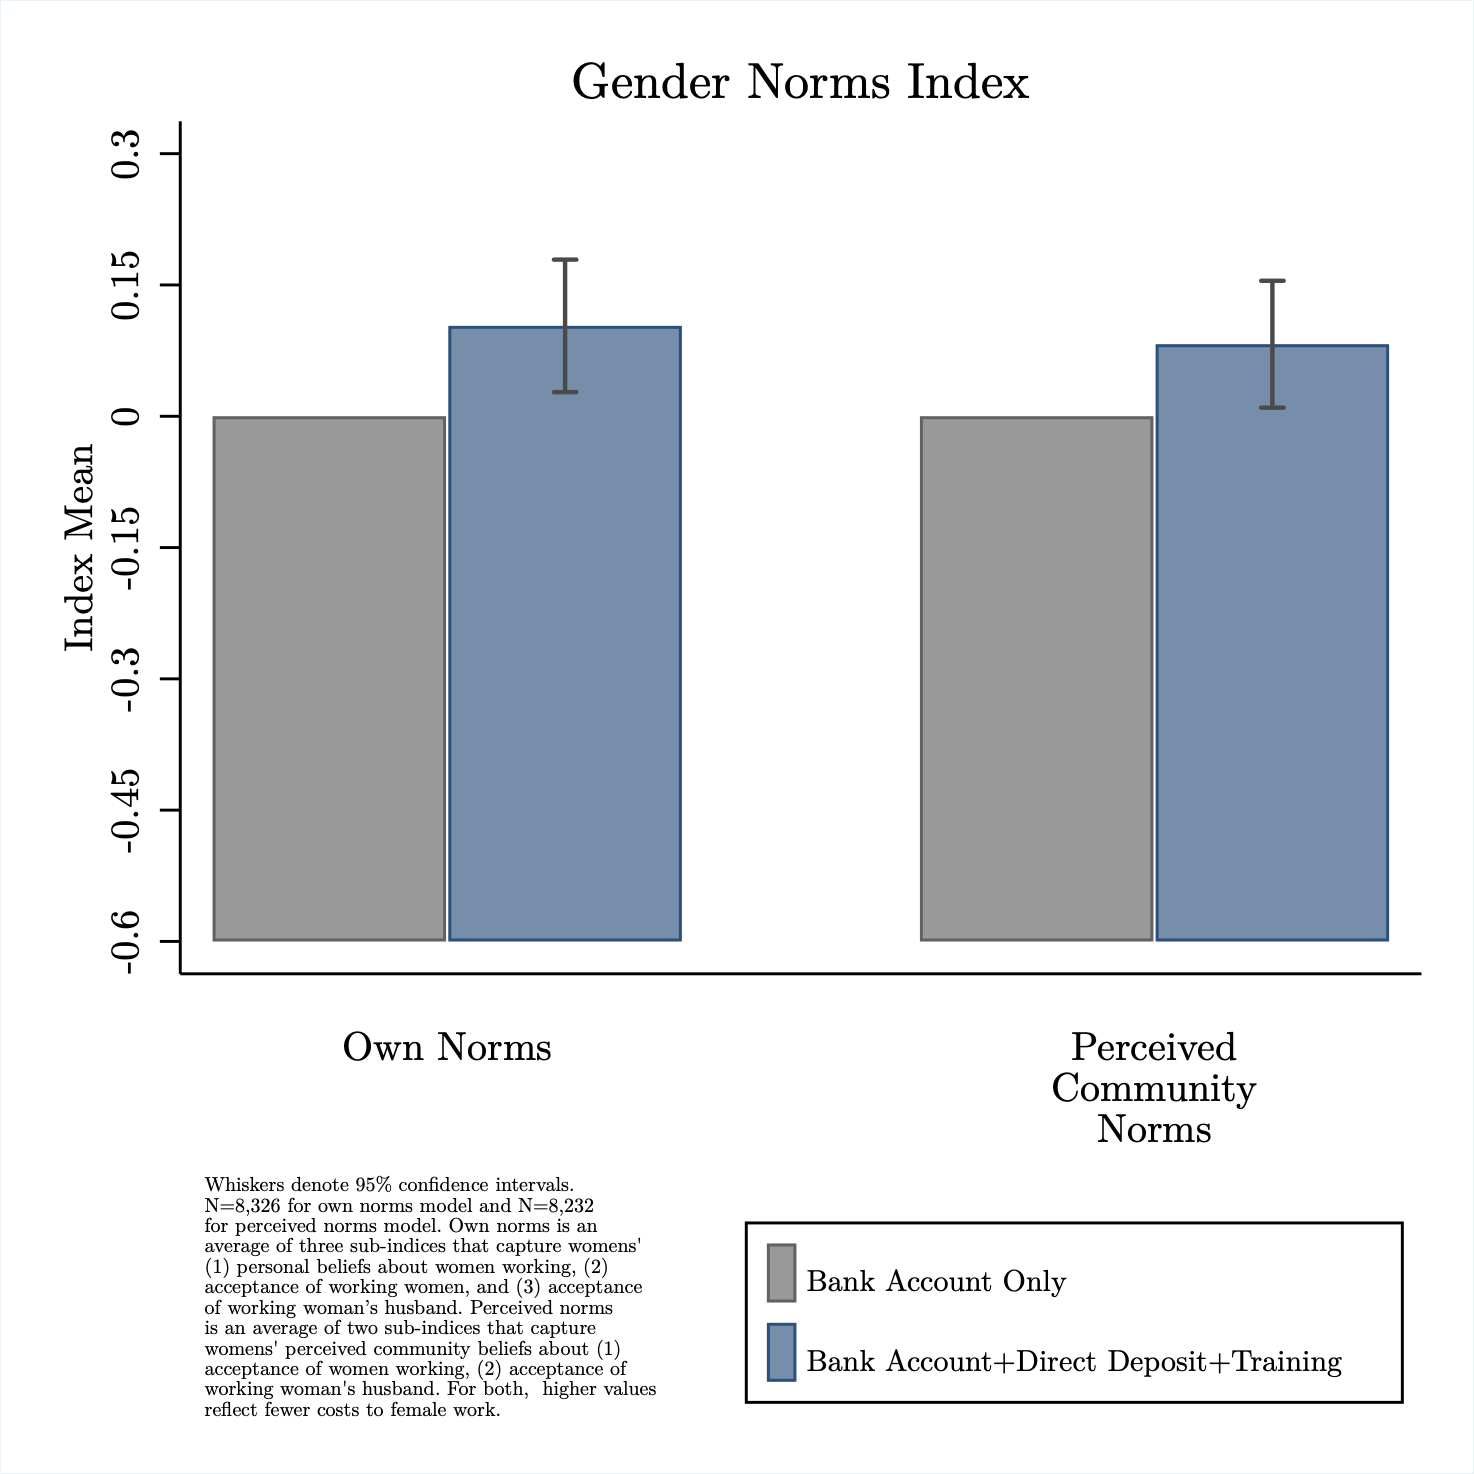 A graph showing that, on an index of gender norms, women in treatment became more accepting of women's work, and perceived that their community did too.